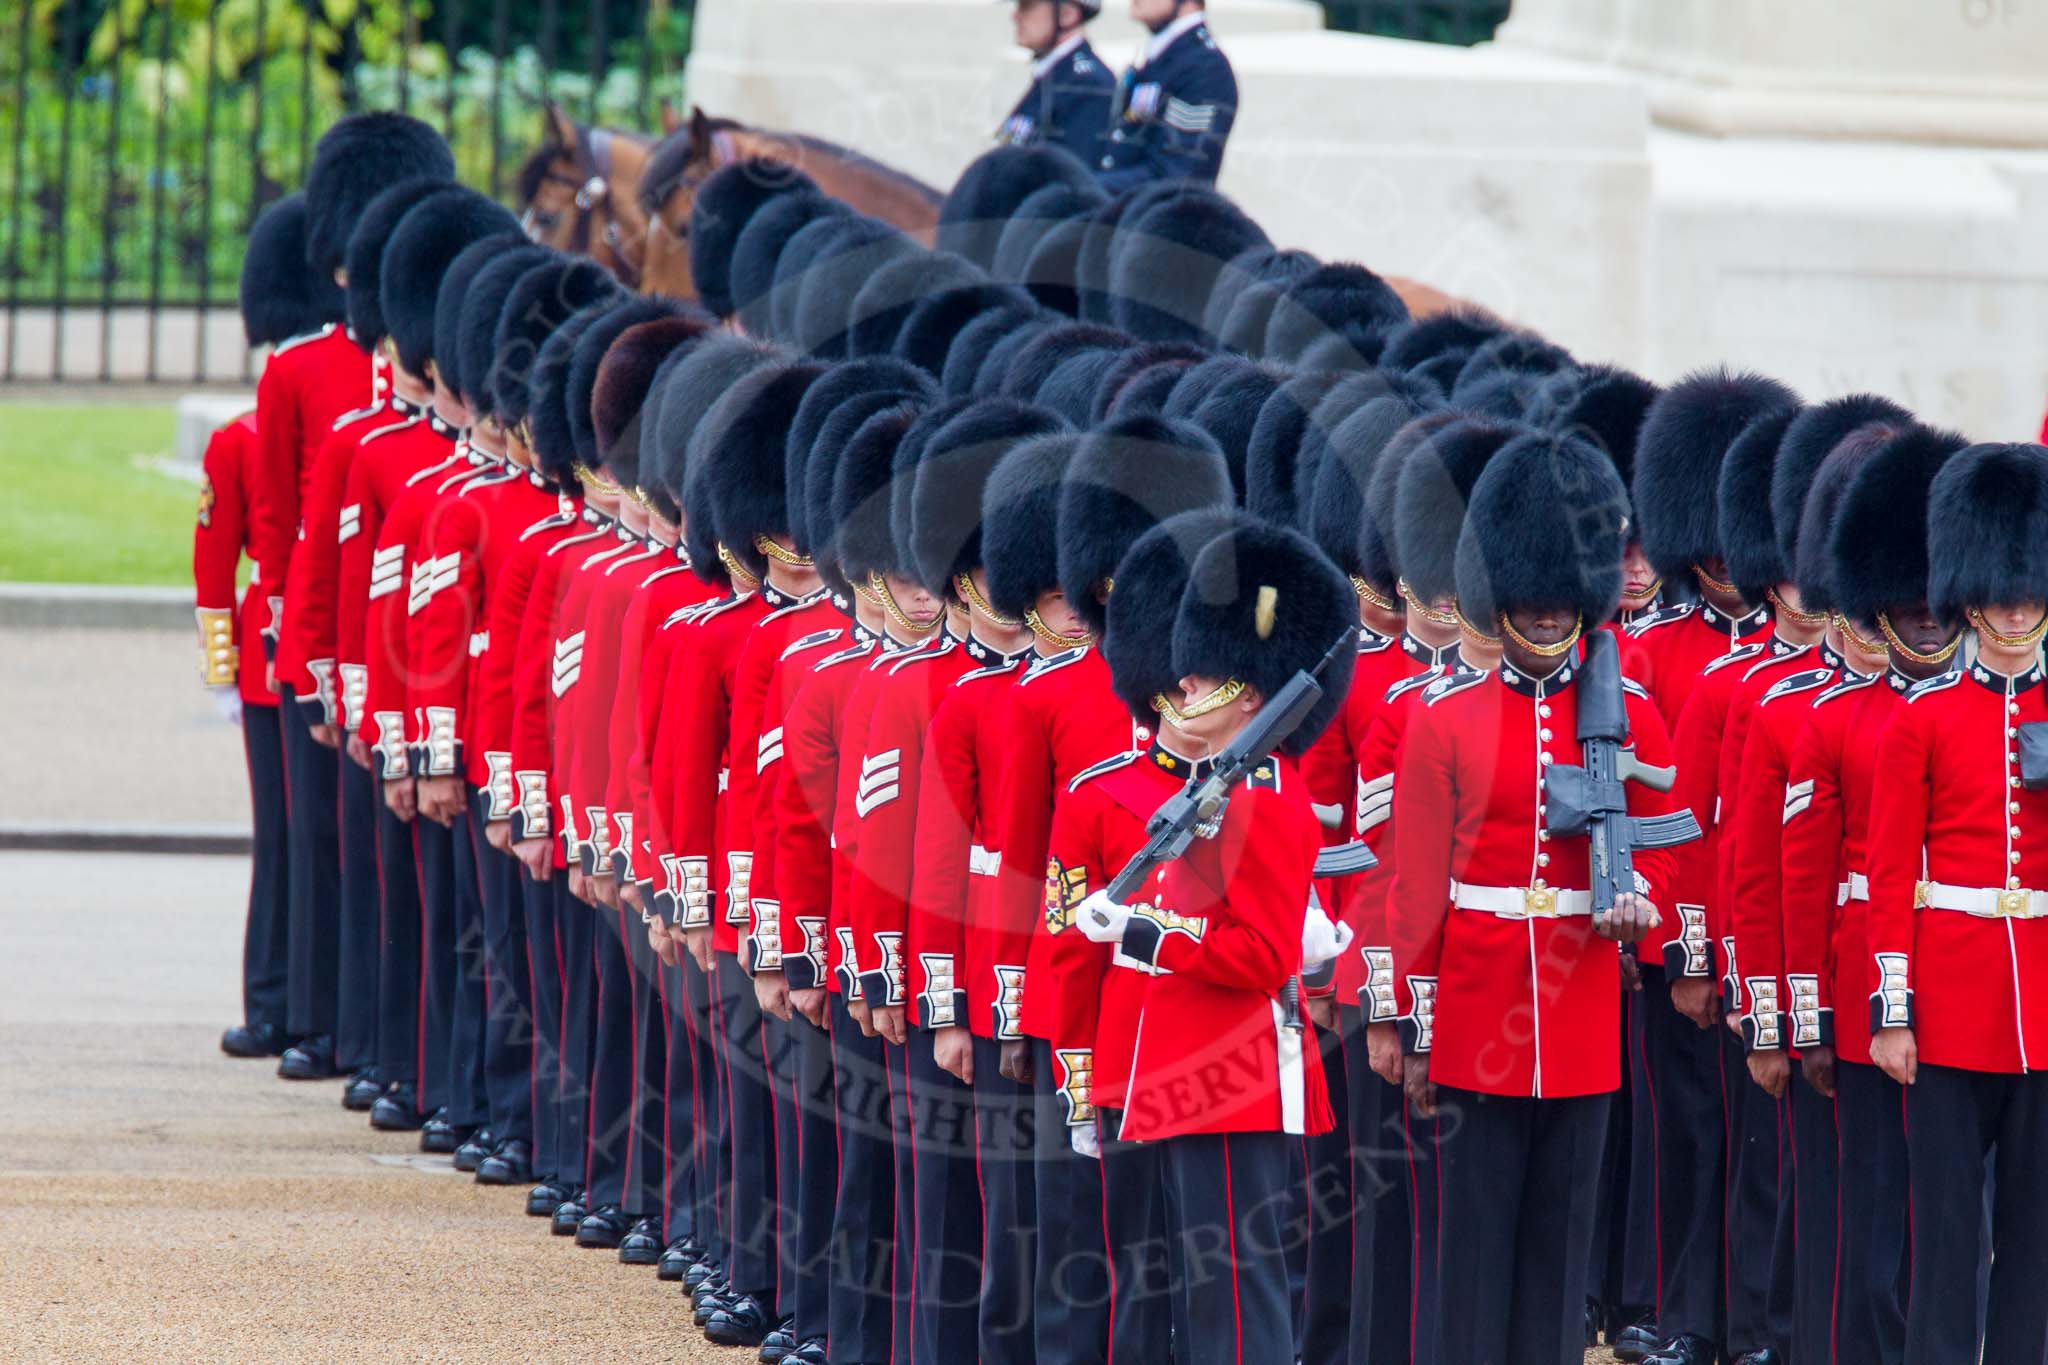 Trooping the Colour 2014.
Horse Guards Parade, Westminster,
London SW1A,

United Kingdom,
on 14 June 2014 at 10:31, image #186